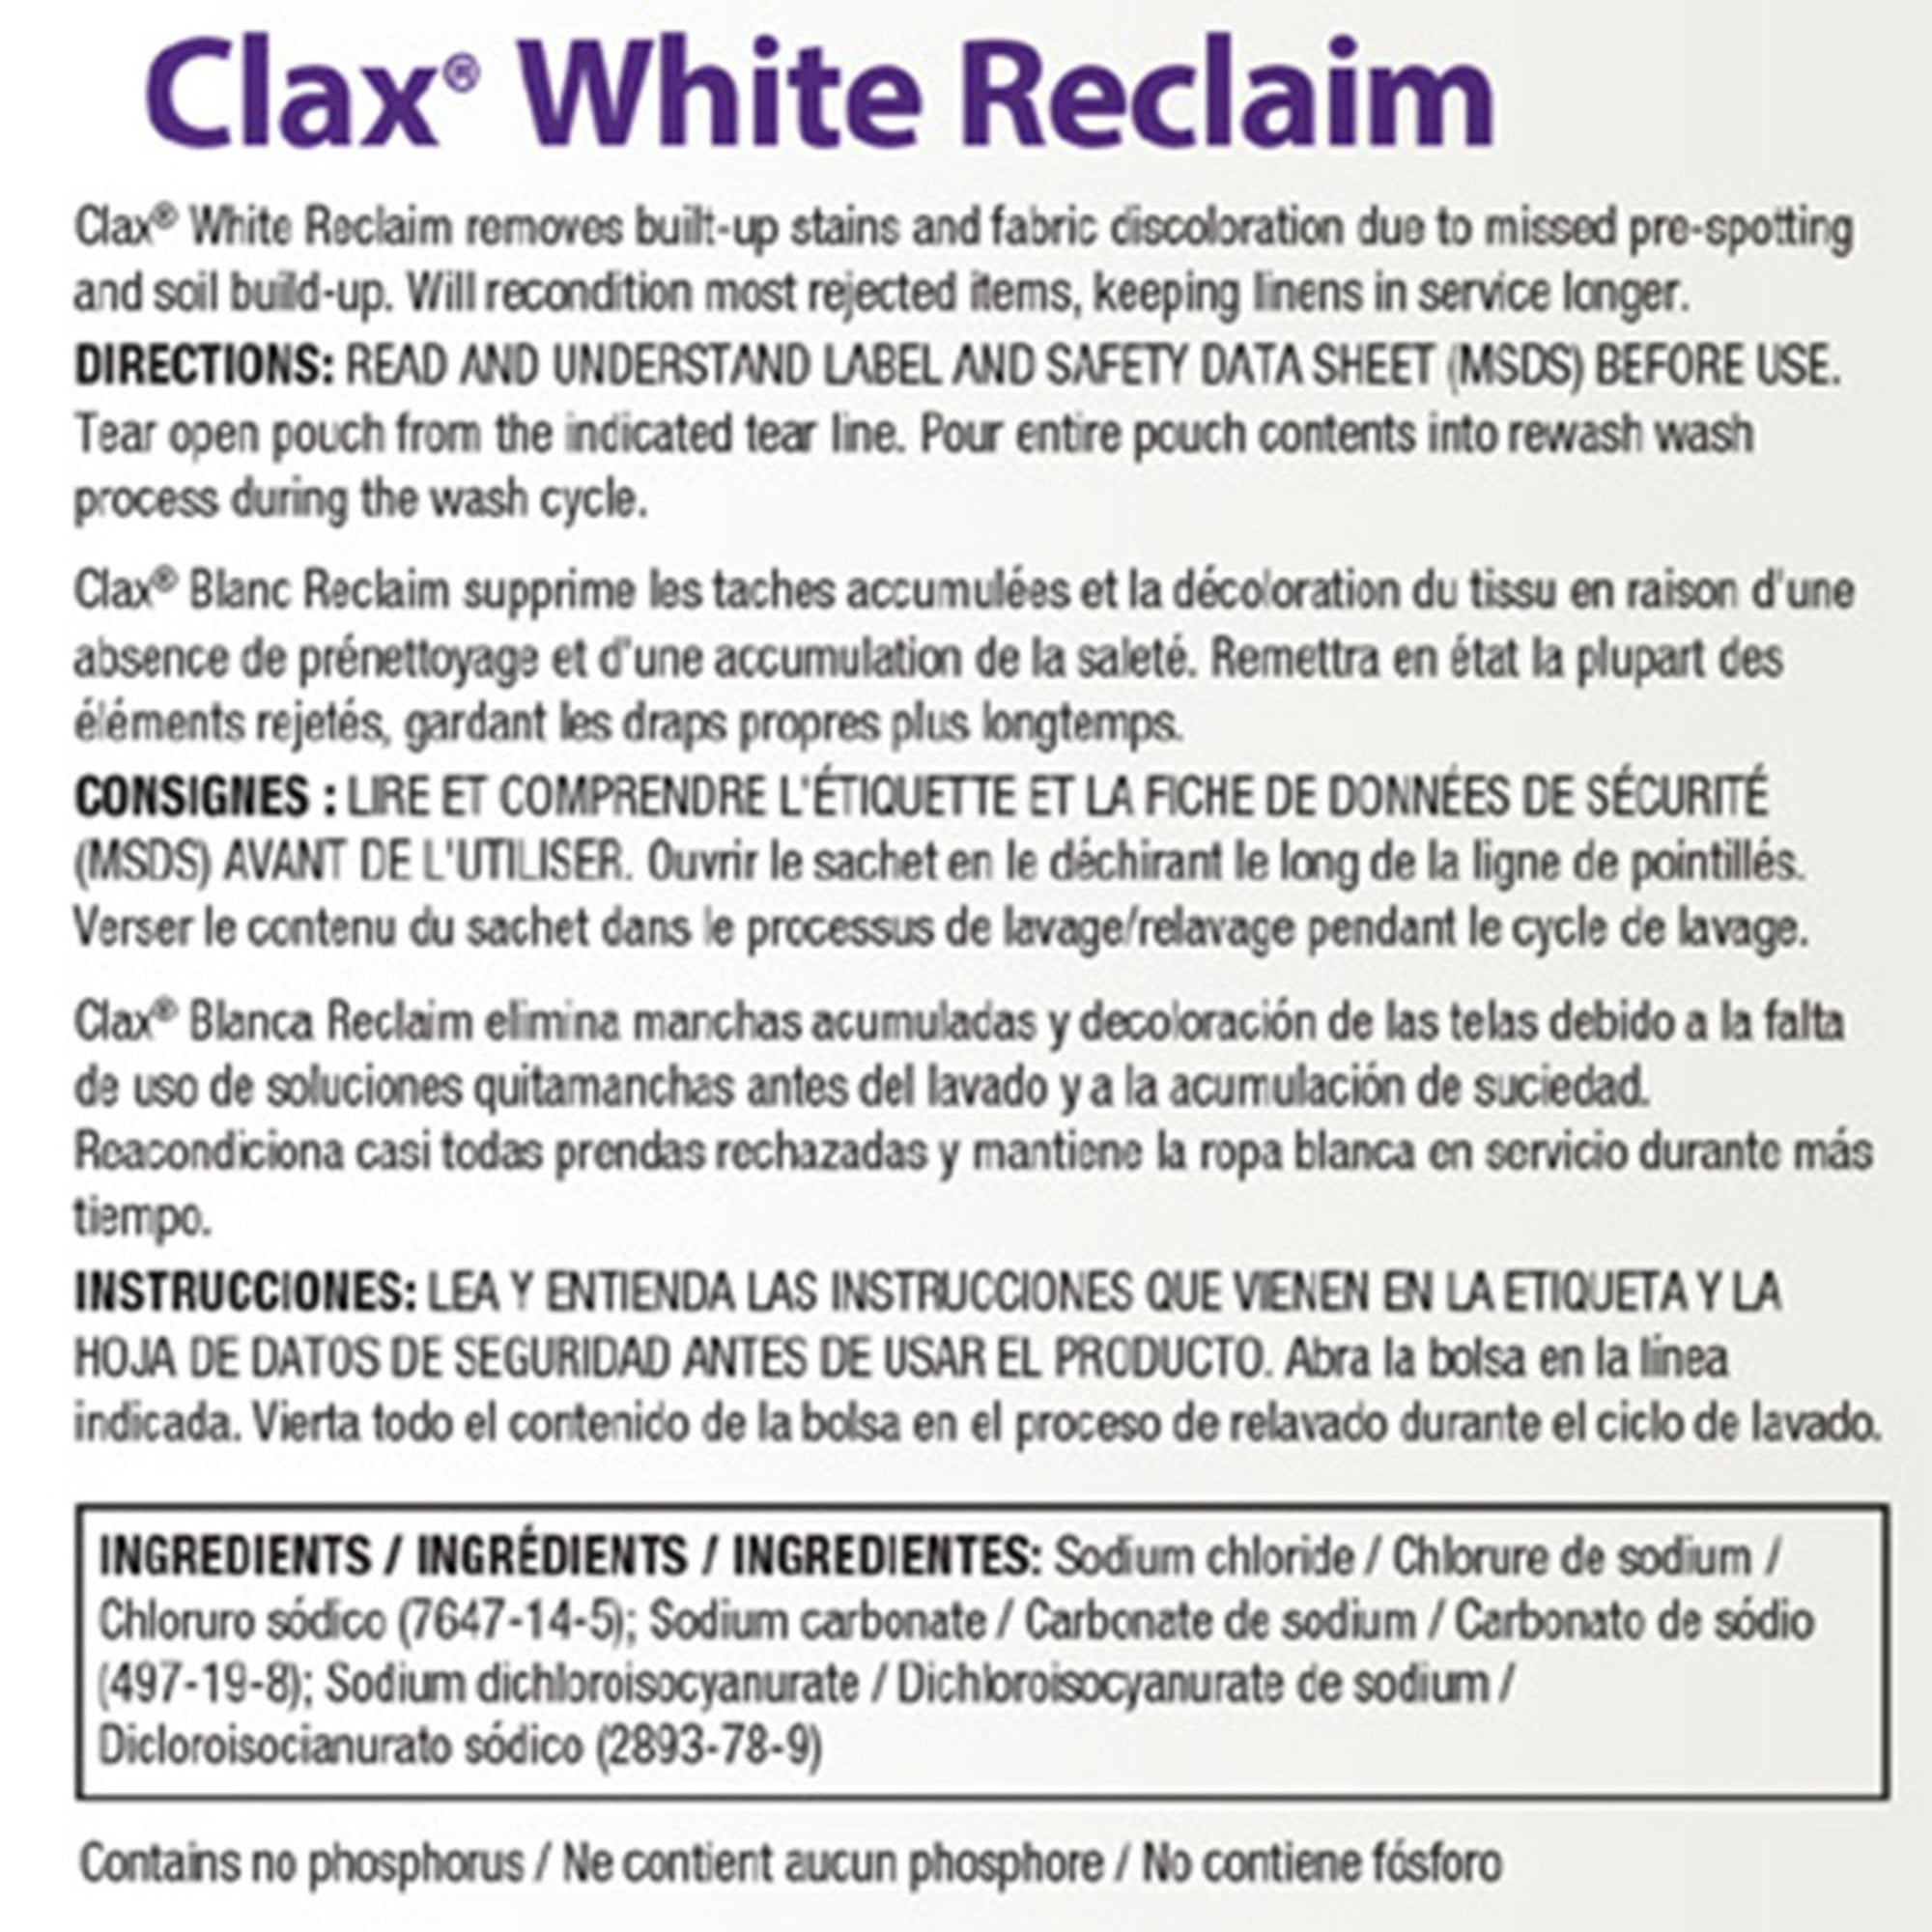 Laundry Stain Remover Clax White Reclaim 1 lbs. Bag Powder Chlorine Scent